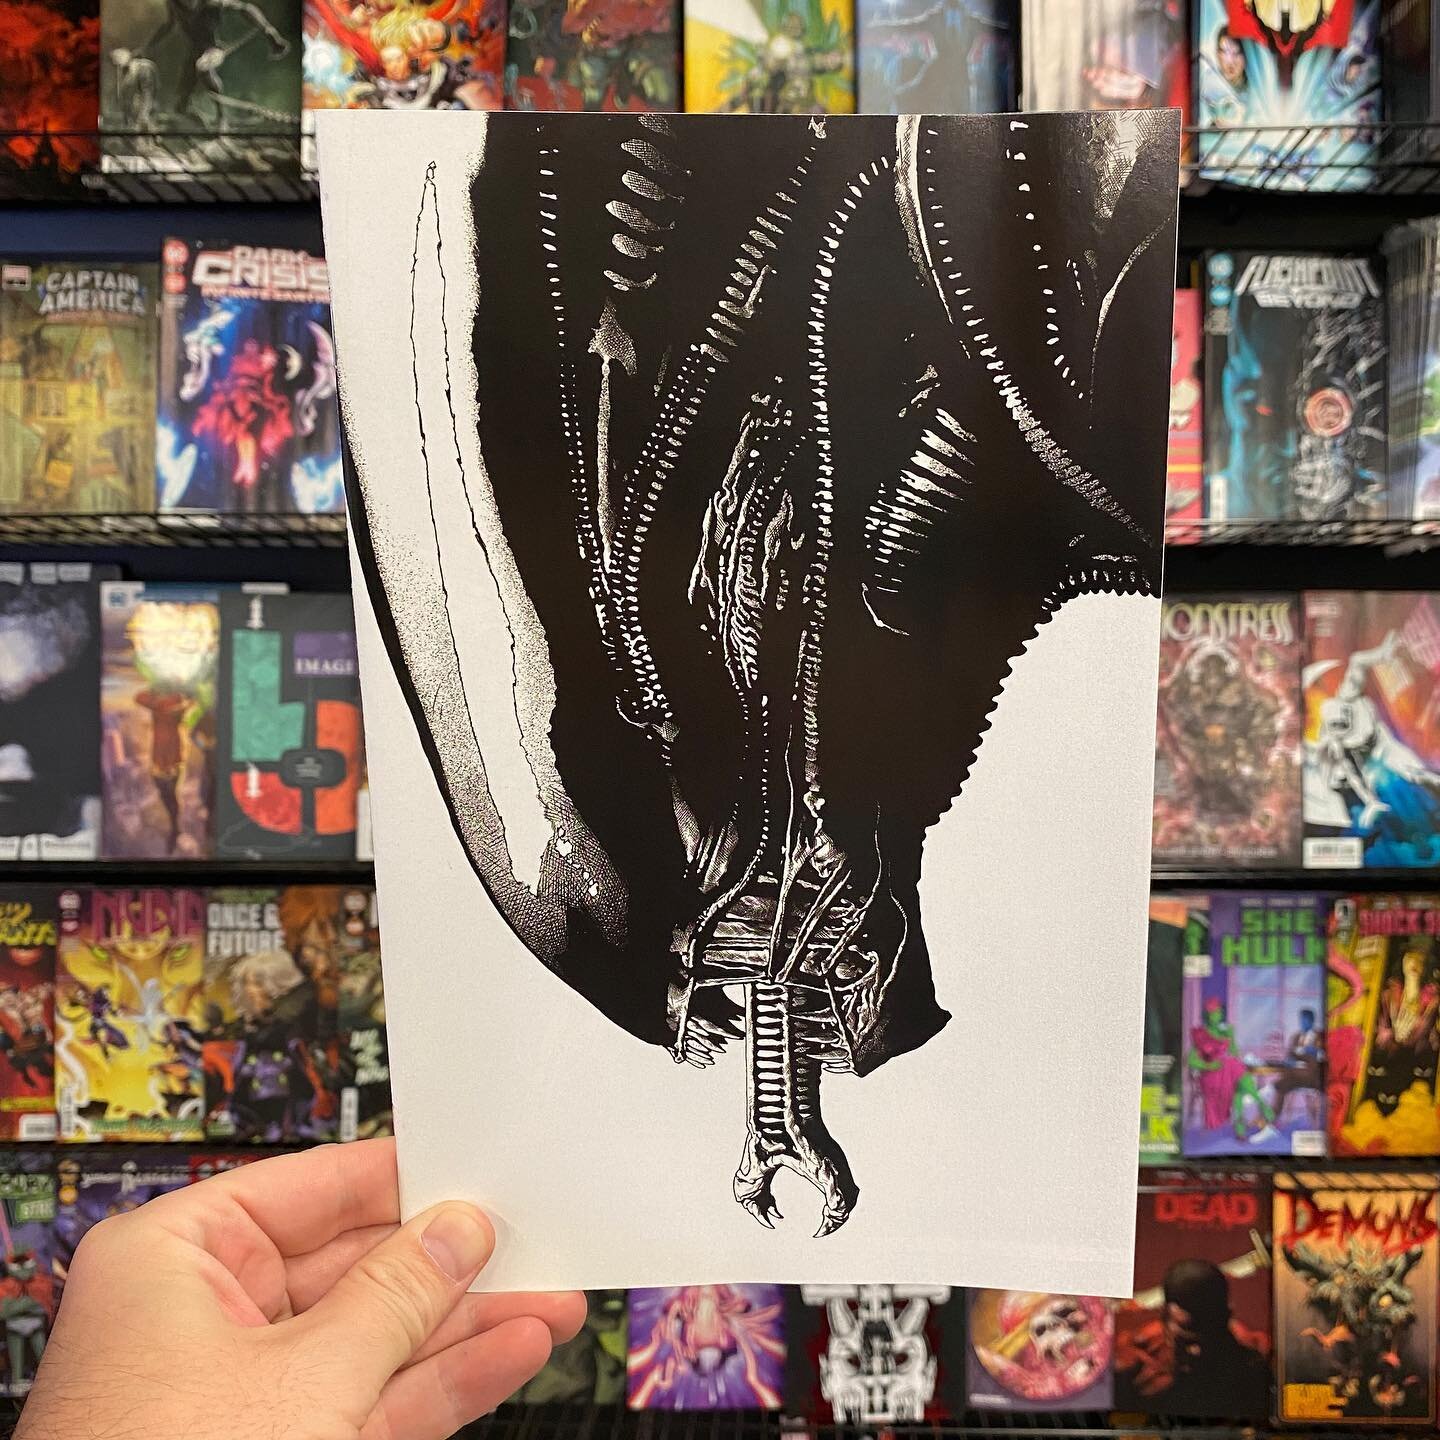 You don&rsquo;t need me to tell you it&rsquo;s New Comic Book Day! You *know* it is! And we&rsquo;ve got the books: 3 new Bat books, Alien 1 with a badass PX exclusive variant, the new Dark Crisis, an action packed Avengers 1, highly anticipated Eigh